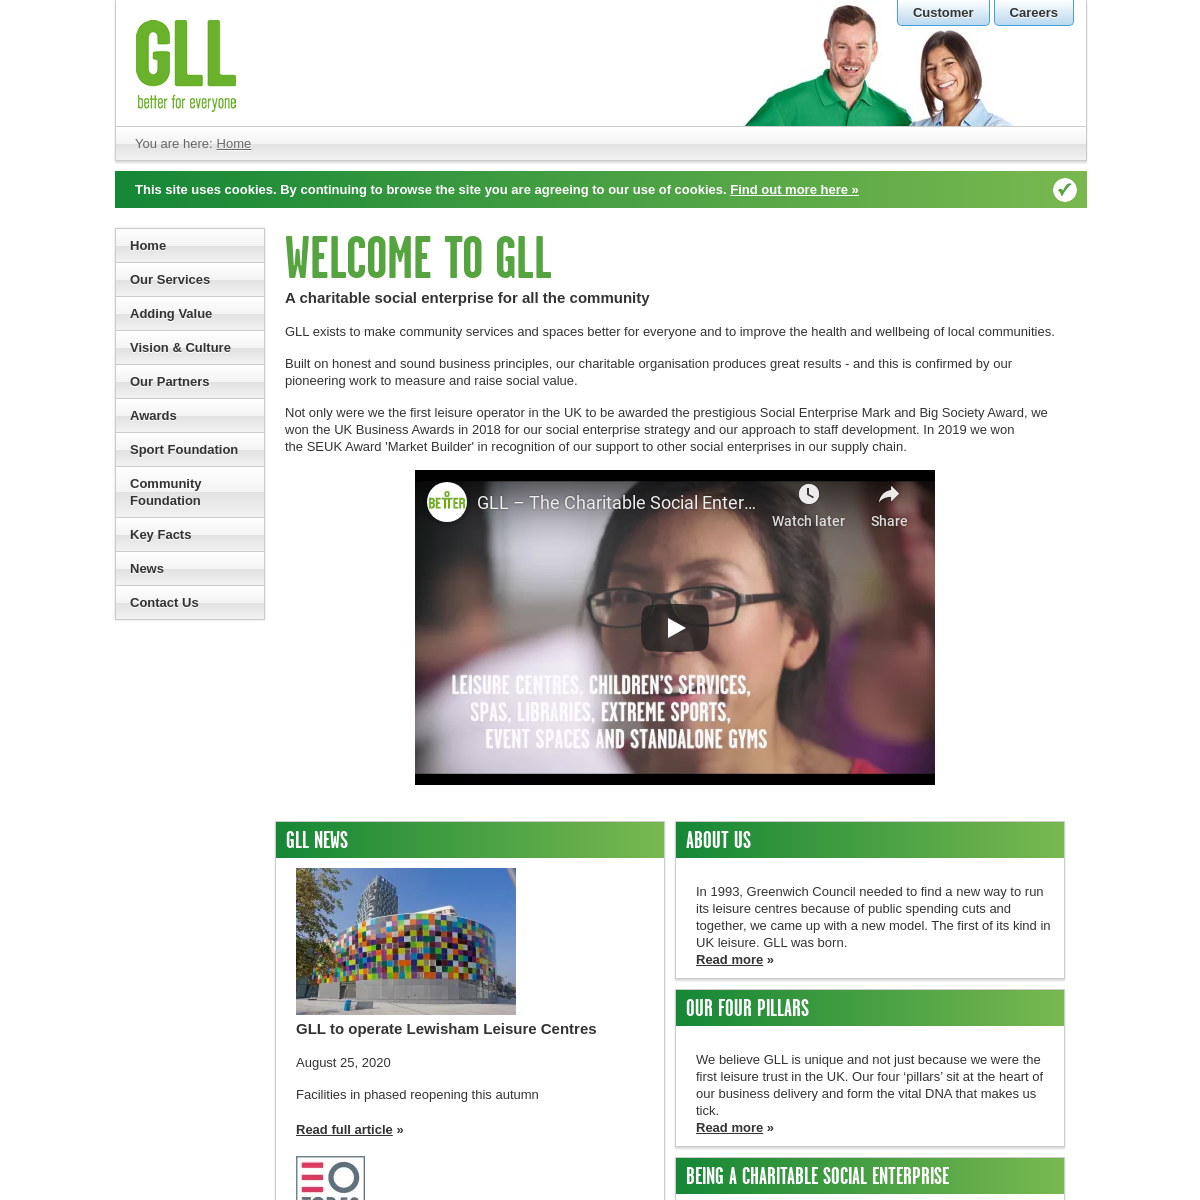 A complete backup of gll.org